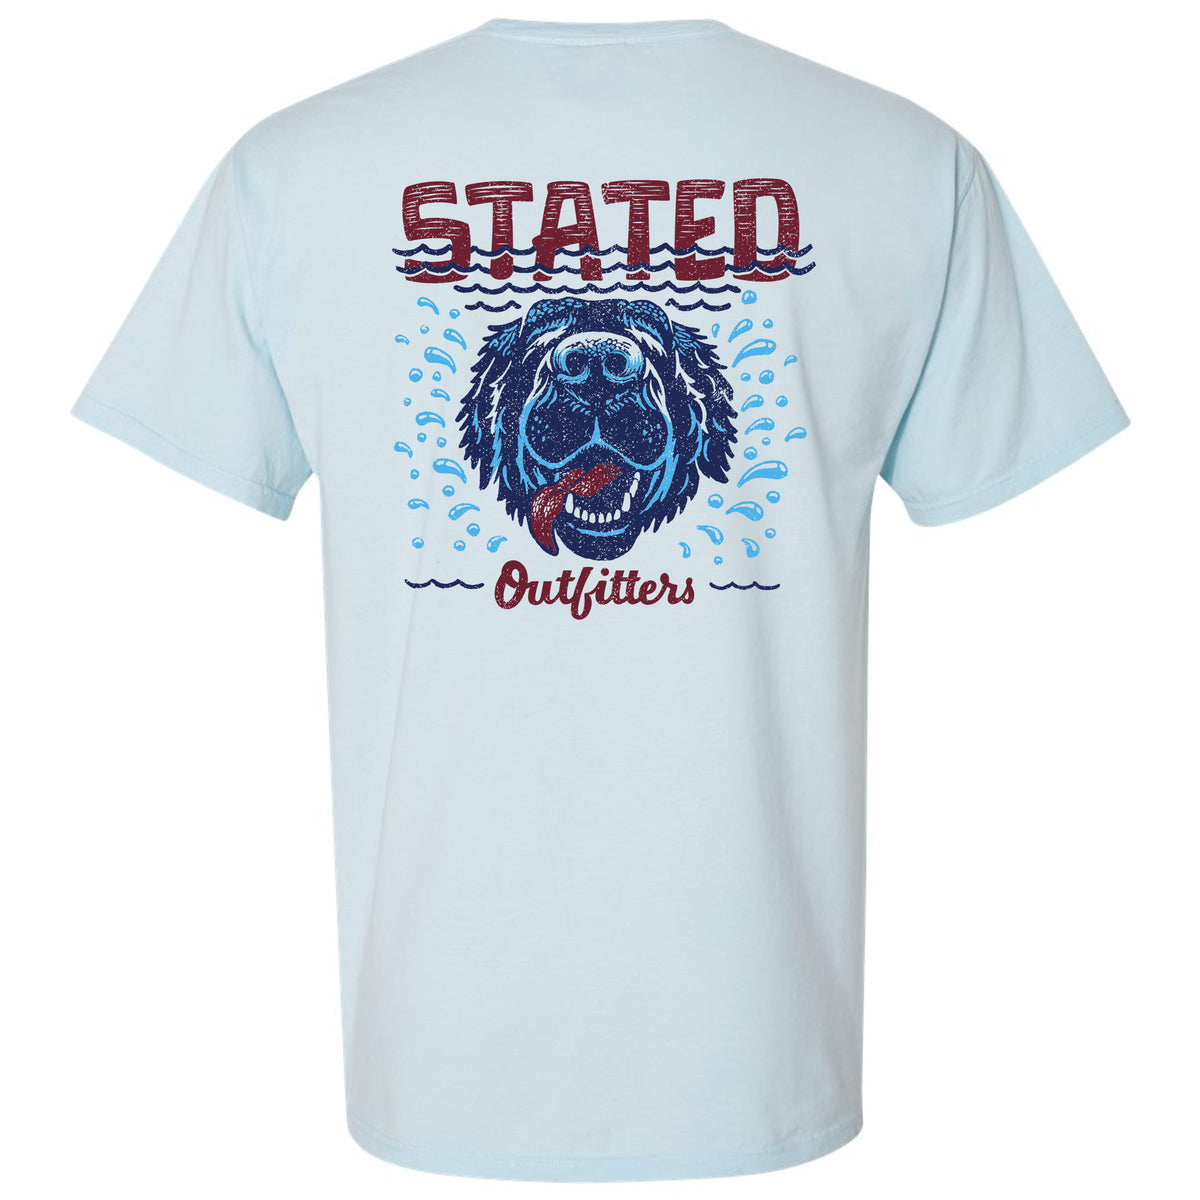 Stated Outfitters Wet Dog Tee